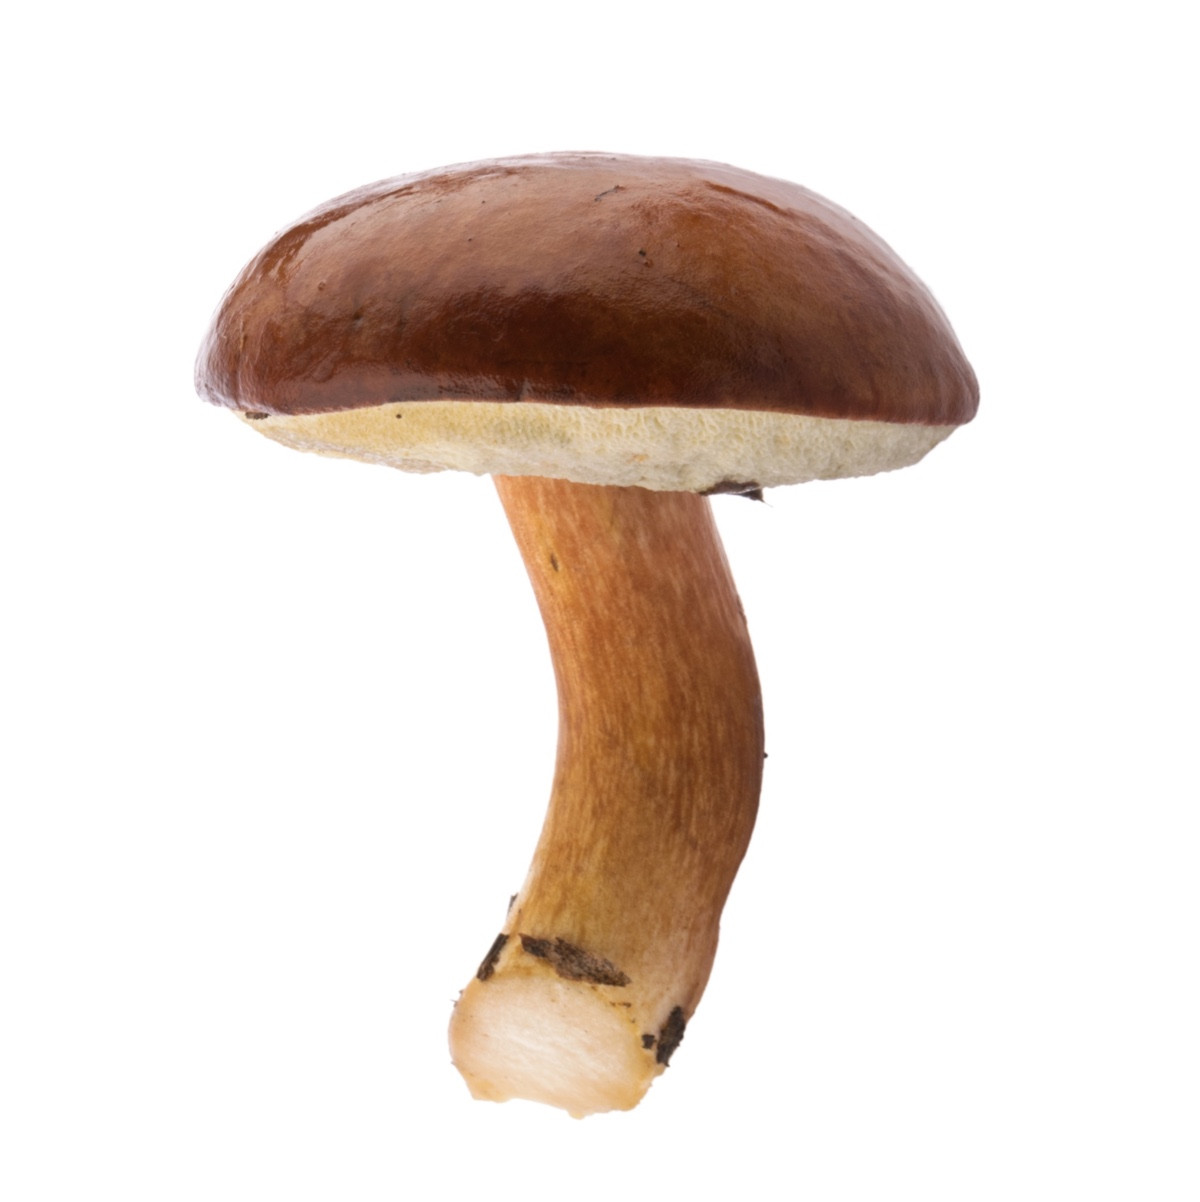 image for crop 'Pilz'